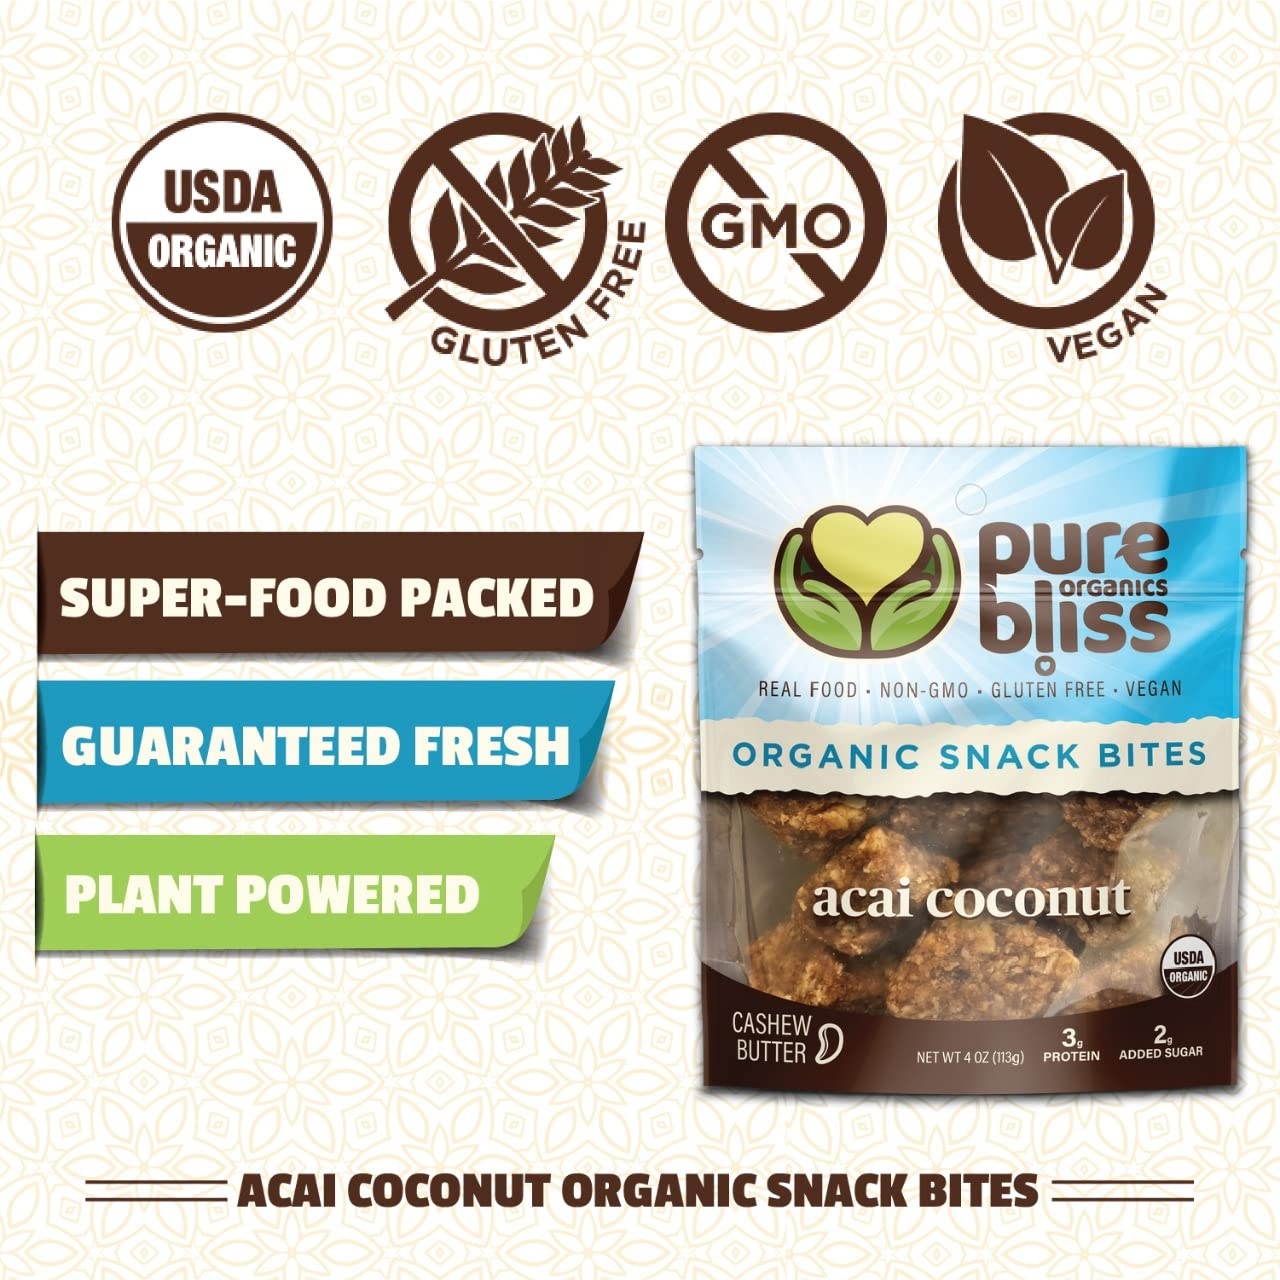 Organic Super Food Energy Bites - Acai Coconut - Non-GMO, Gluten Free, Vegan, Whole Food Healthy Snack Bites, Dairy Free, Soy Free Pure Bliss Organics: Acai Coconut Cashew Butter (3 pack - 4oz each)